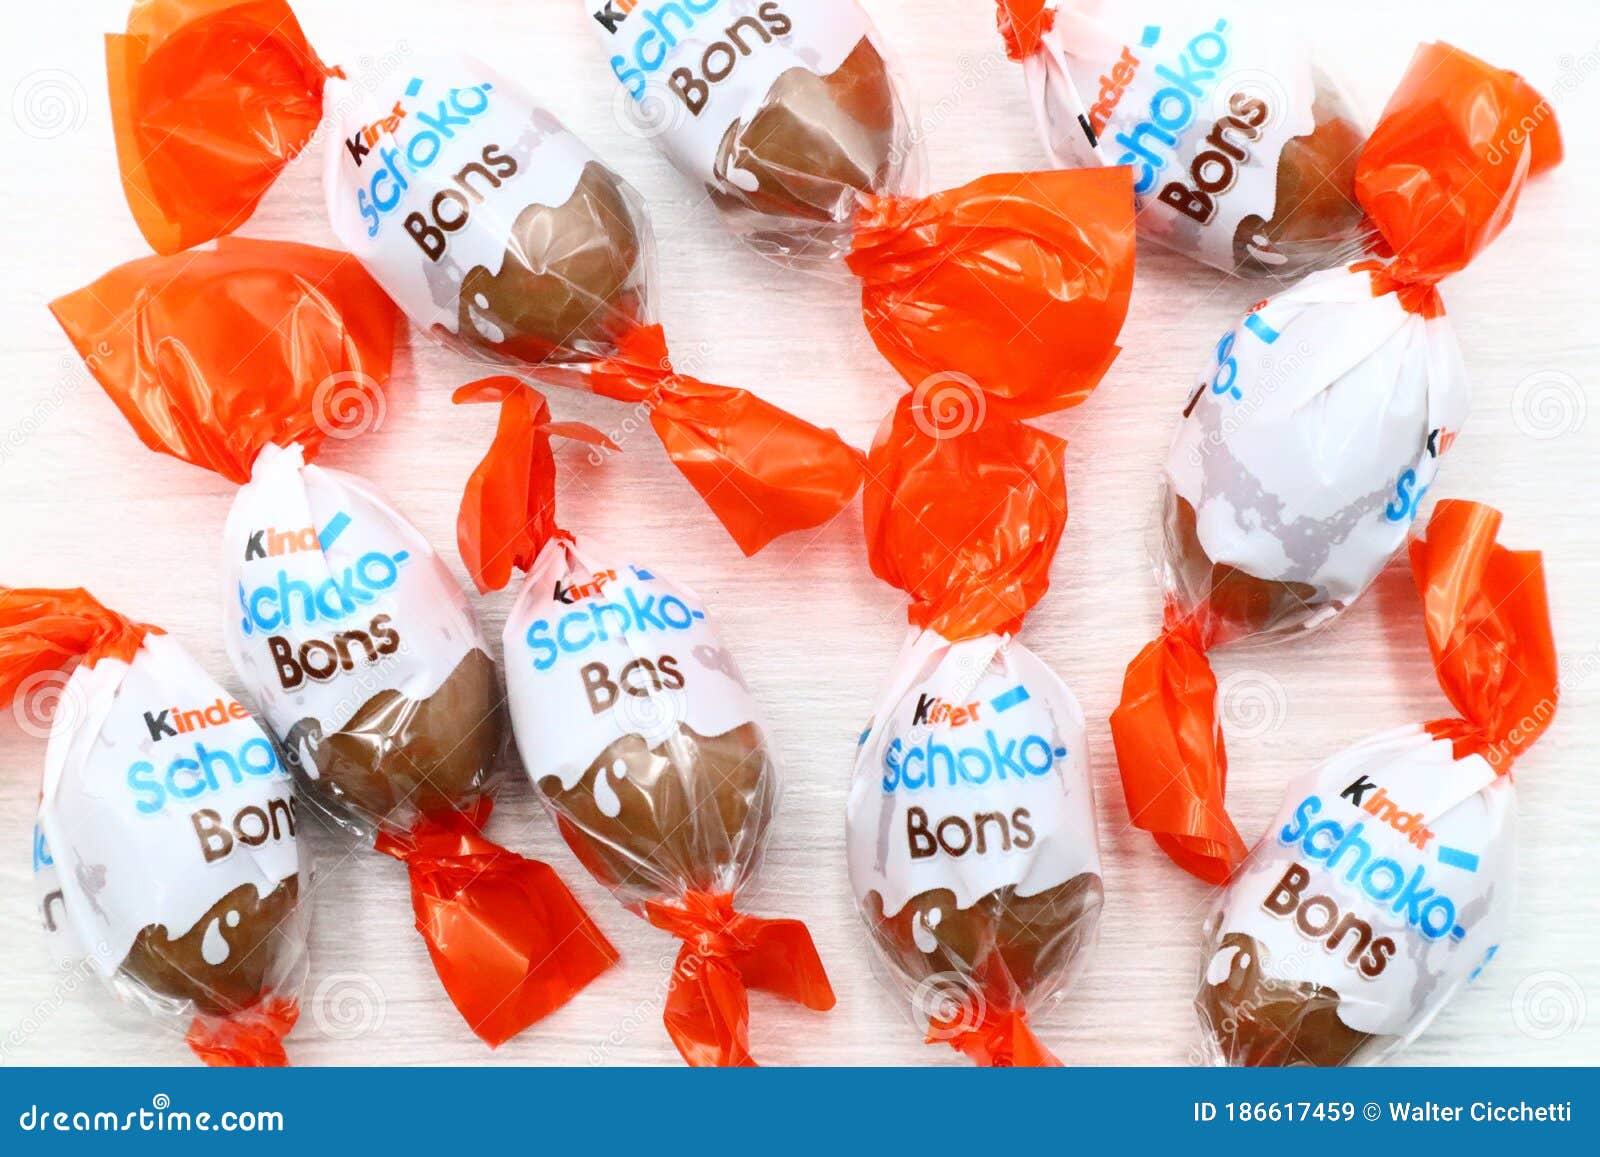 Schoko Bons - Free & Royalty-Free Stock Photos from Dreamstime